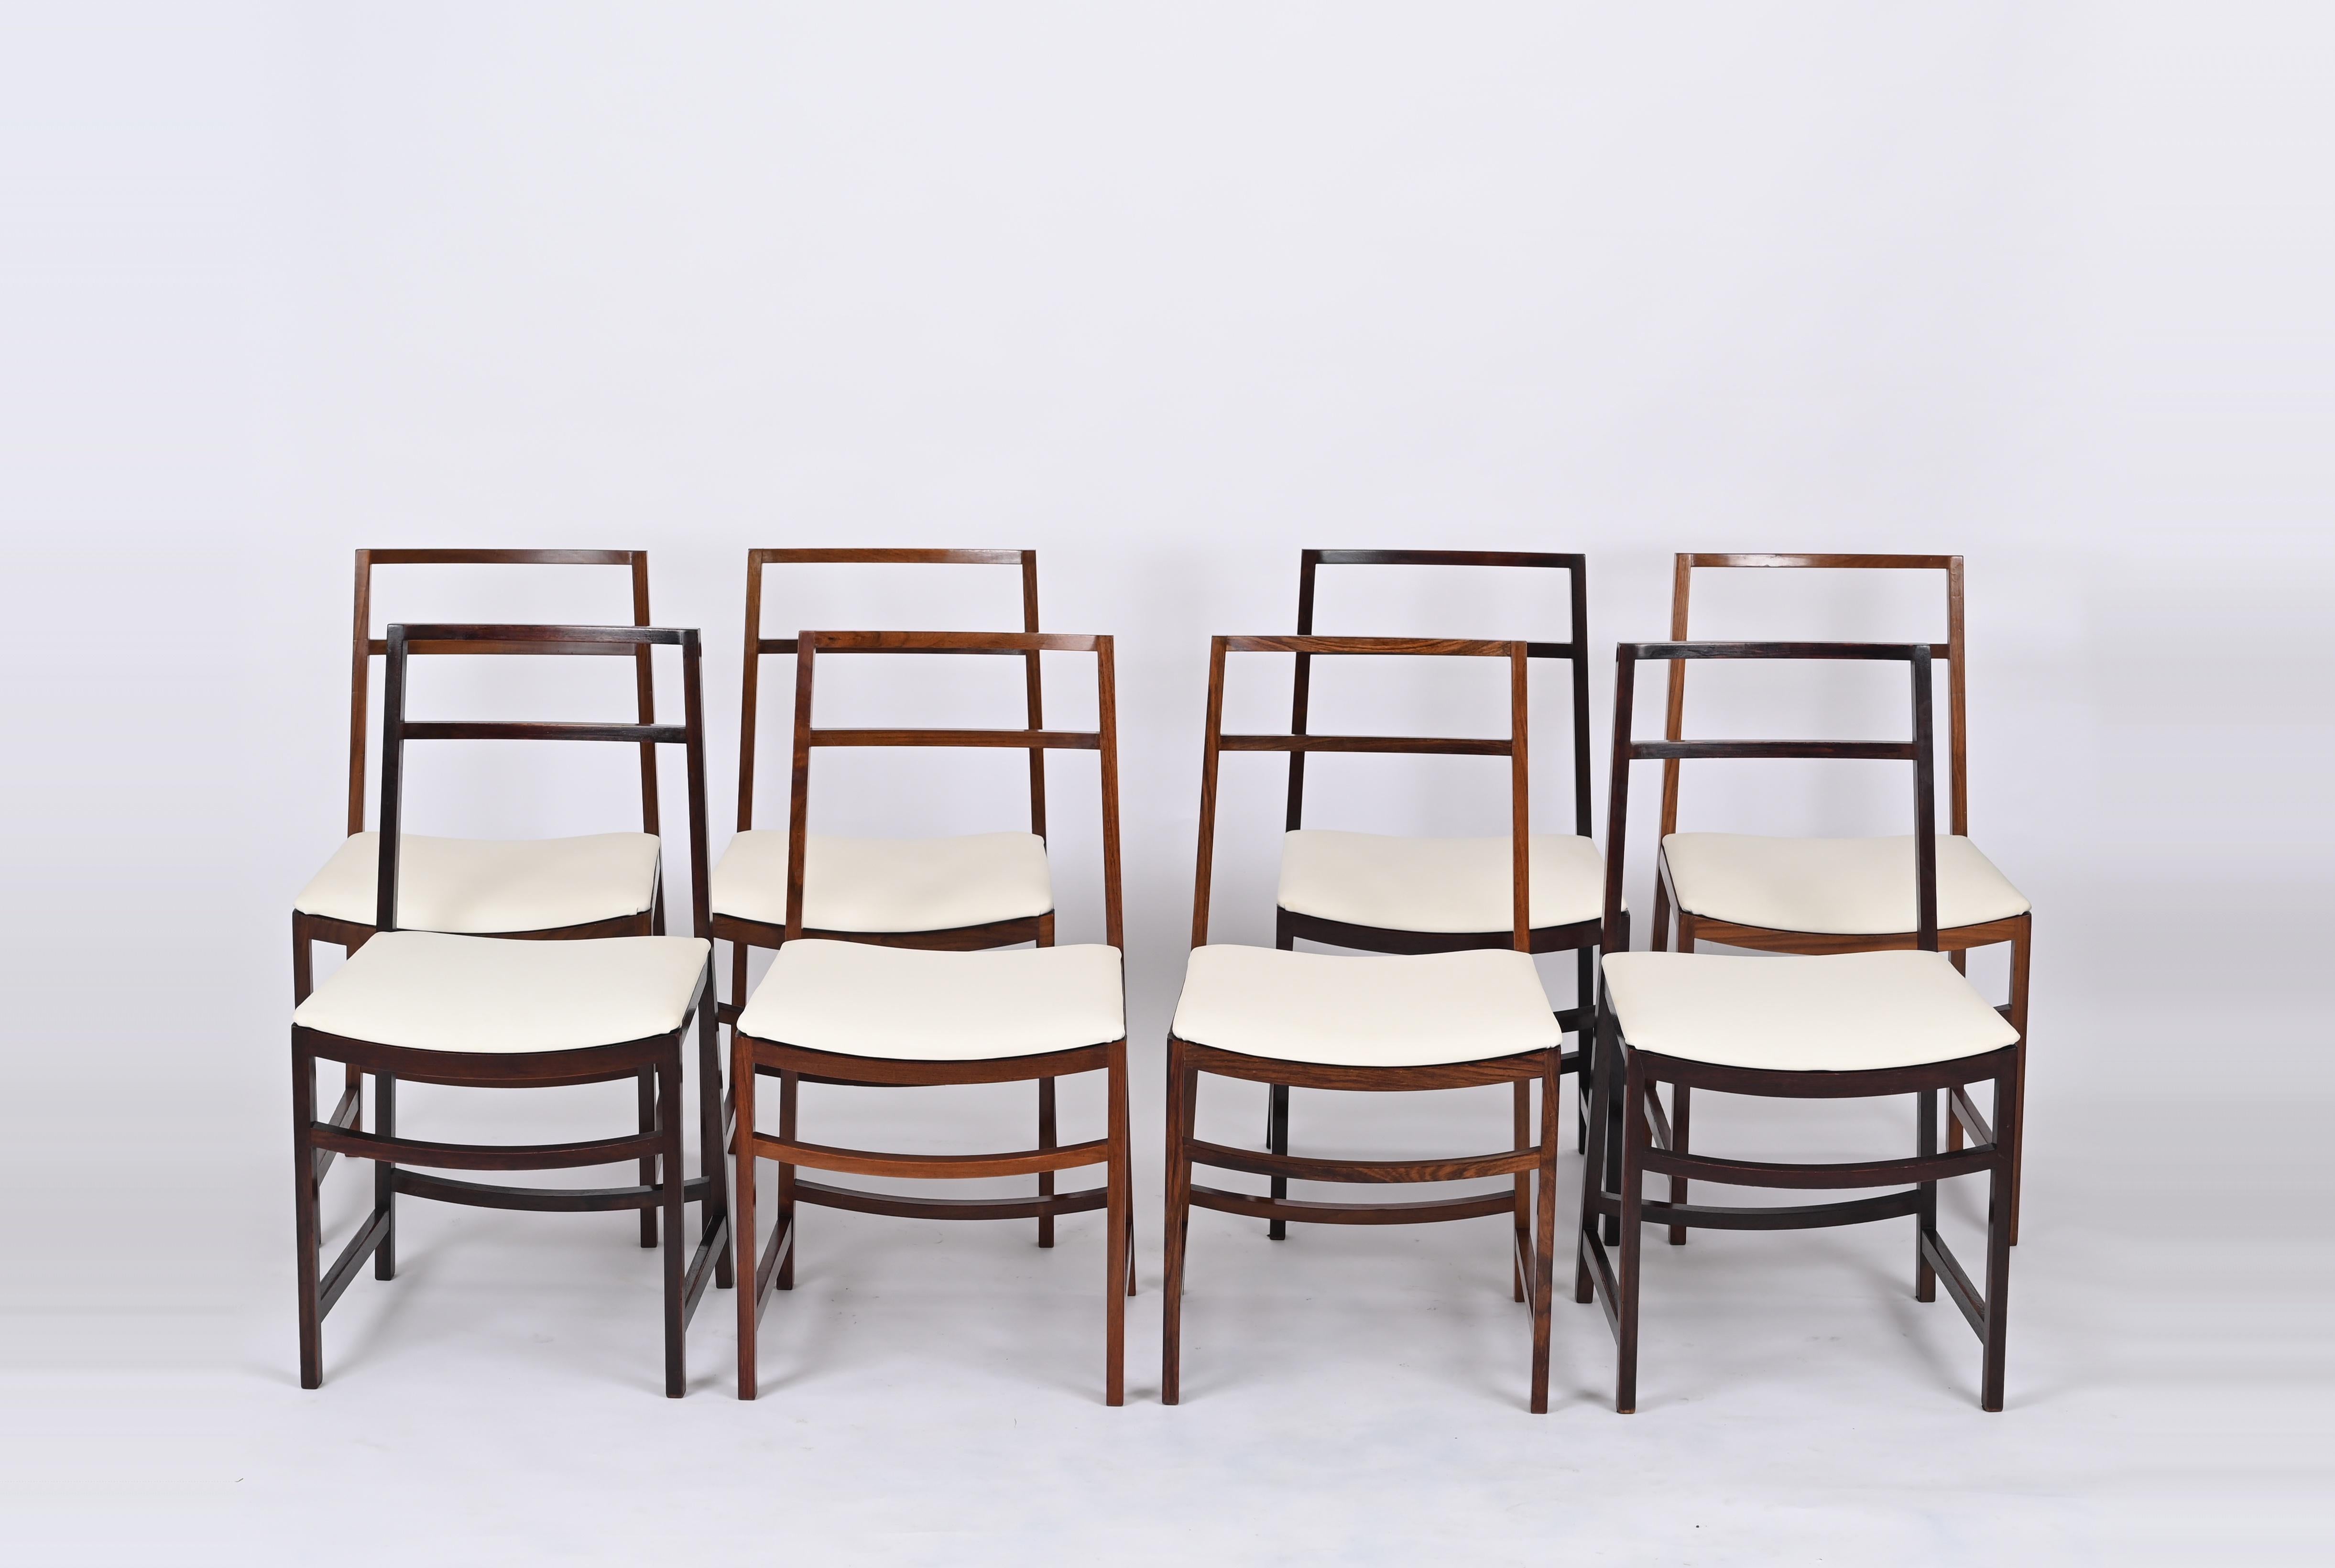 Faux Leather Renato Venturi Set of 8 Italian Dining Chairs for MIM Roma, Italy 1960s For Sale